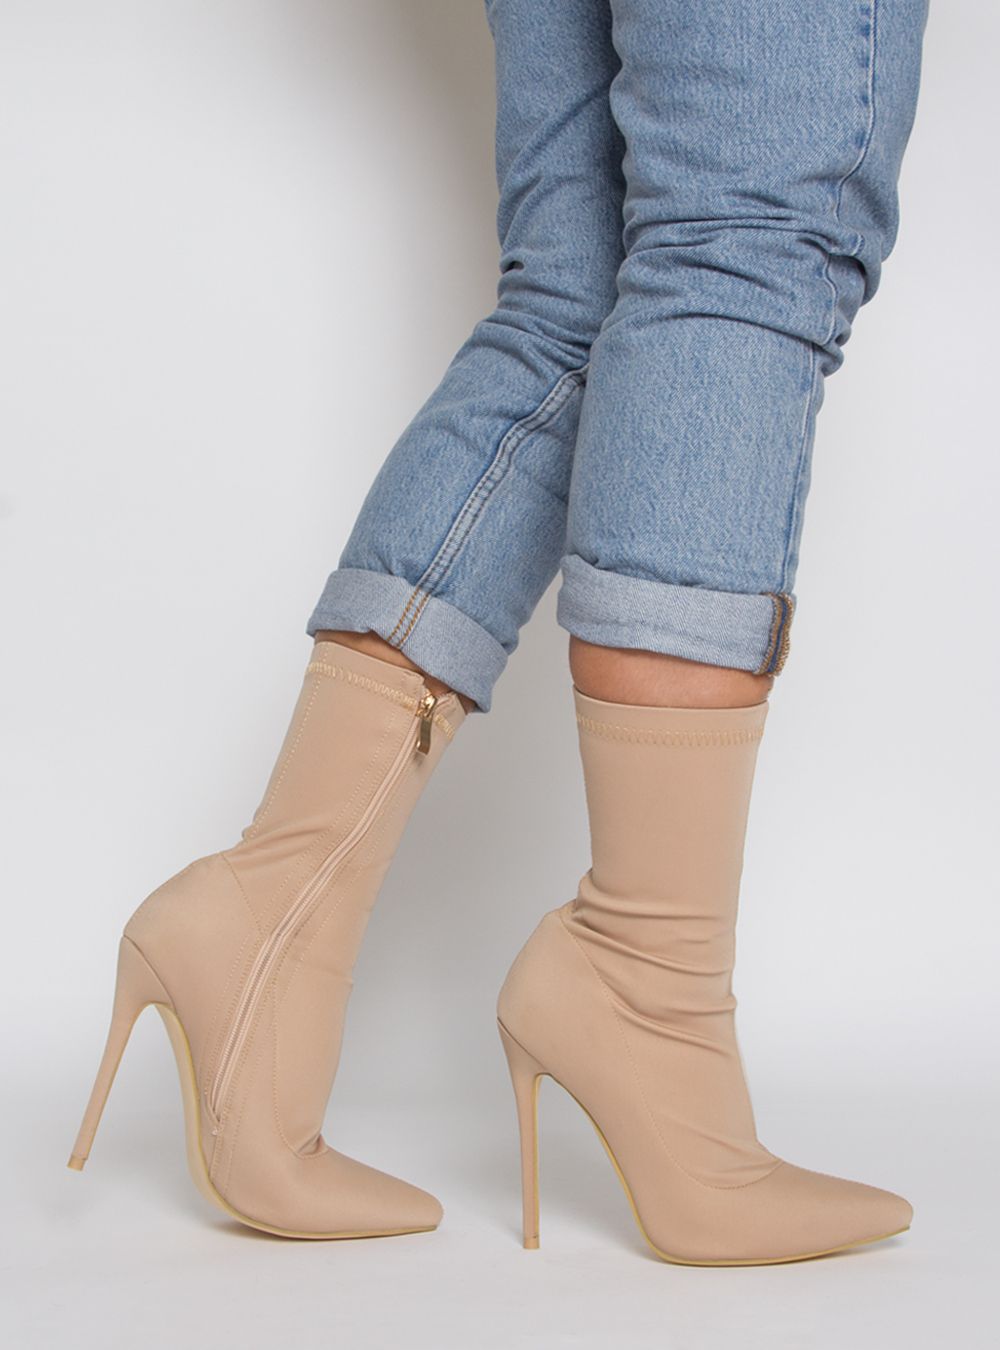 nude pointed toe booties